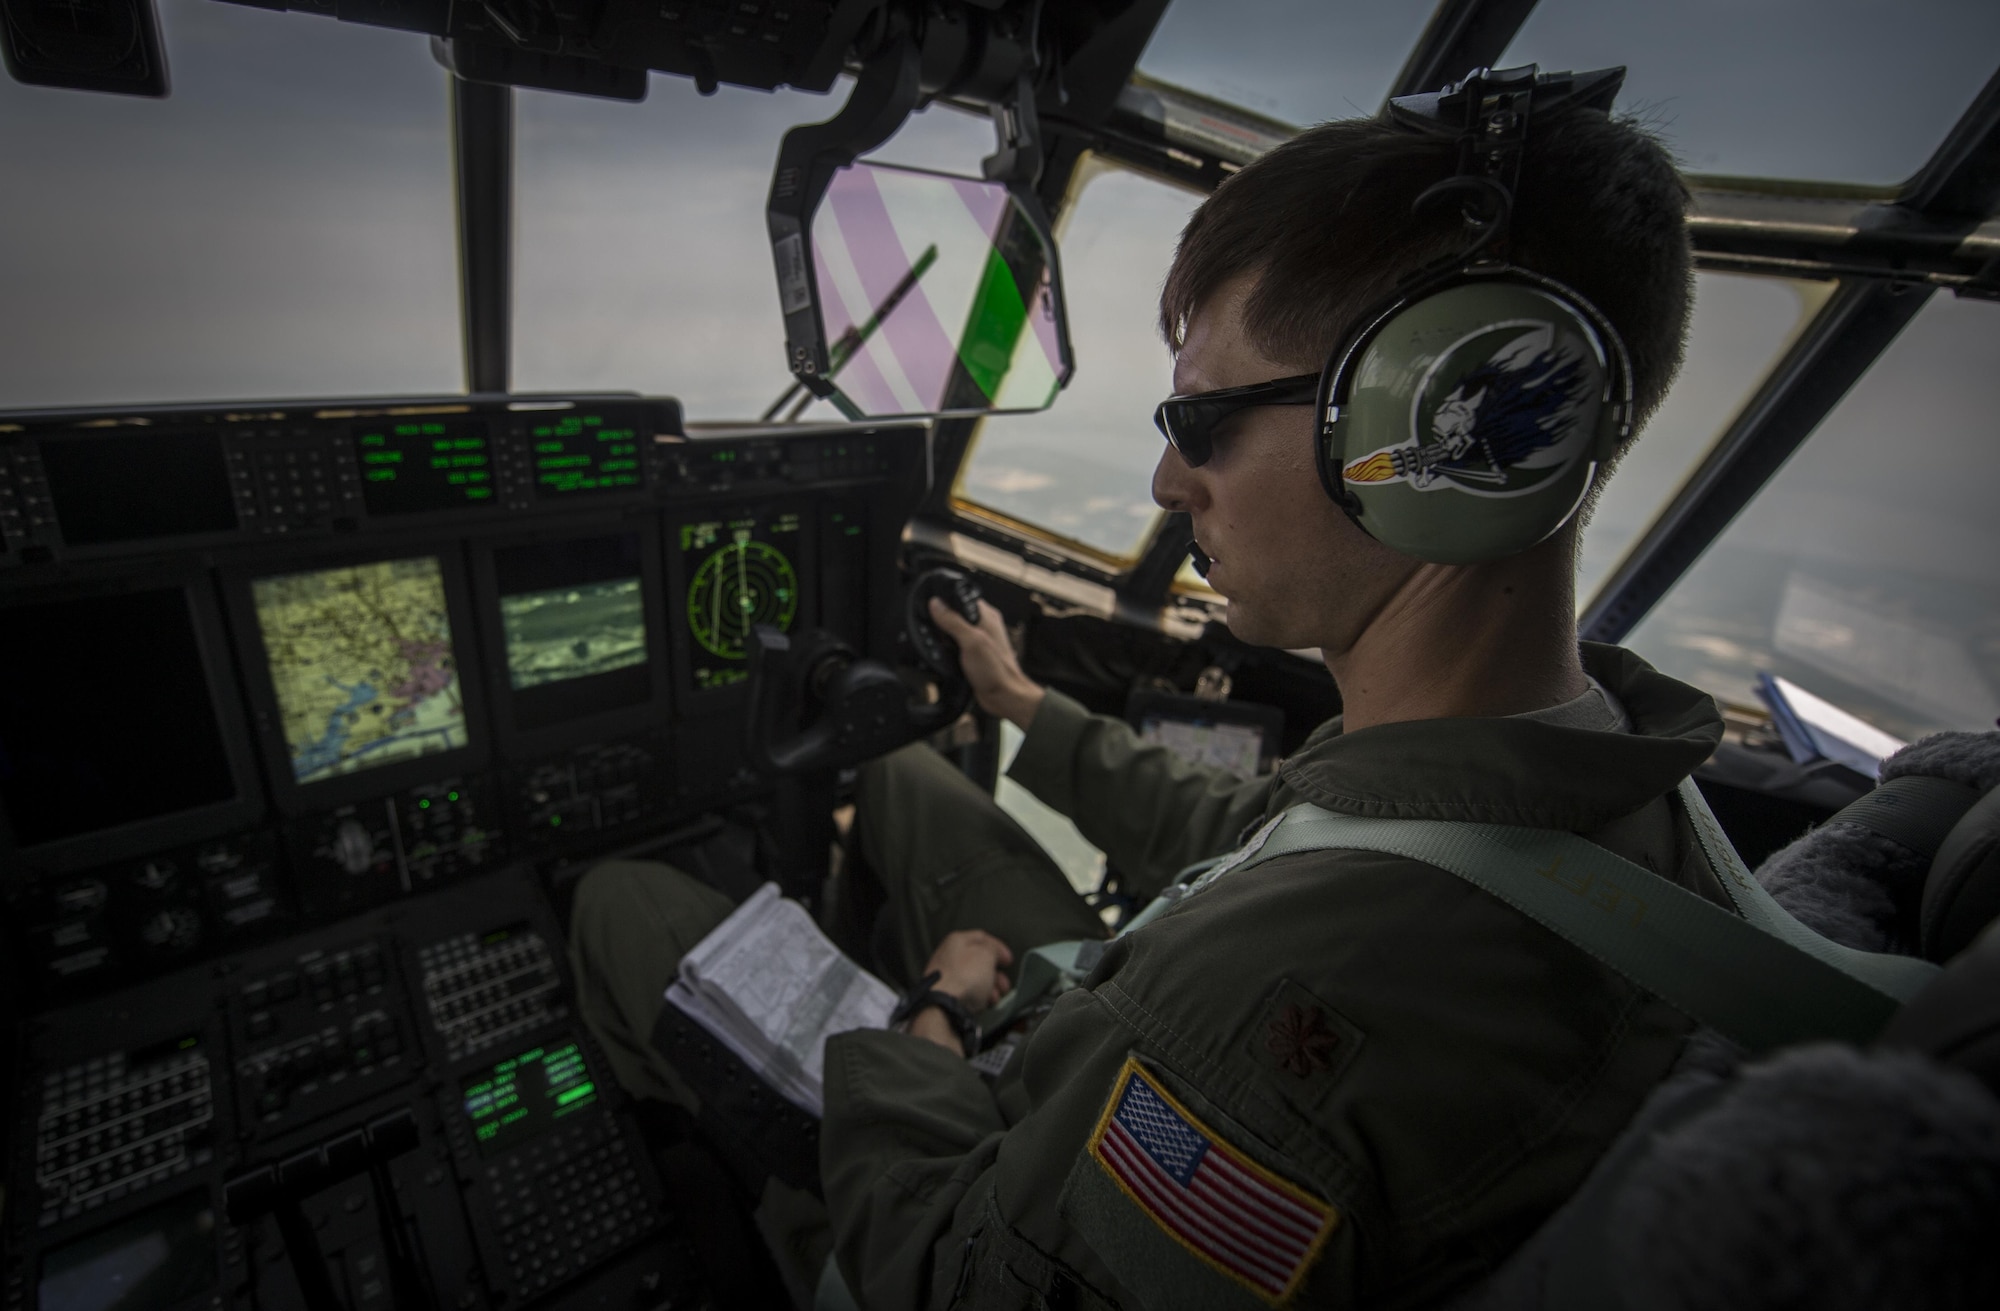 Maj. Brian Pesta, 1st Special Operations Group Detachment 2 co-pilot, delivers Air Force Special Operations Command’s first AC-130J Ghostrider to the 1st Special Operations Wing on Hurlburt Field, Fla., July 29, 2015. The aircrews of the 1st SOG Det. 2 were hand selected from the AC-130 community for their operational expertise and will begin initial operational testing and evaluation of the AC-130J later this year. (U.S. Air Force photo/Senior Airman Christopher Callaway)